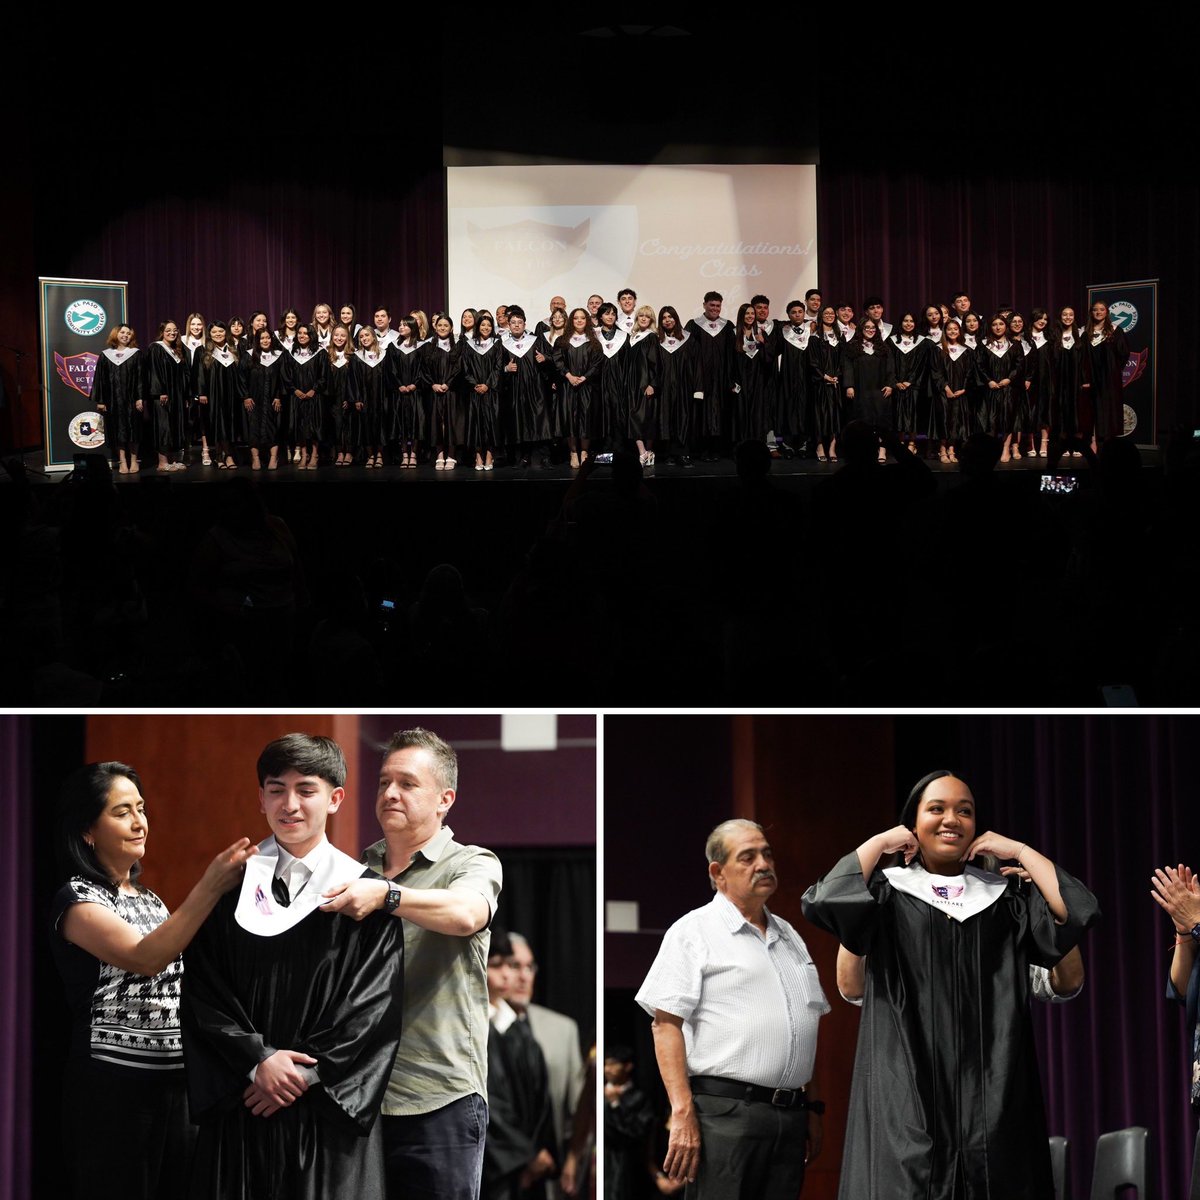 Family, friends and #TeamSISD faculty and staff celebrated 51 @Eastlake_HS Falcon Early College students at tonight's stole ceremony. These remarkable Falcons will receive their associate degrees from EPCC on May 10. Congratulations!